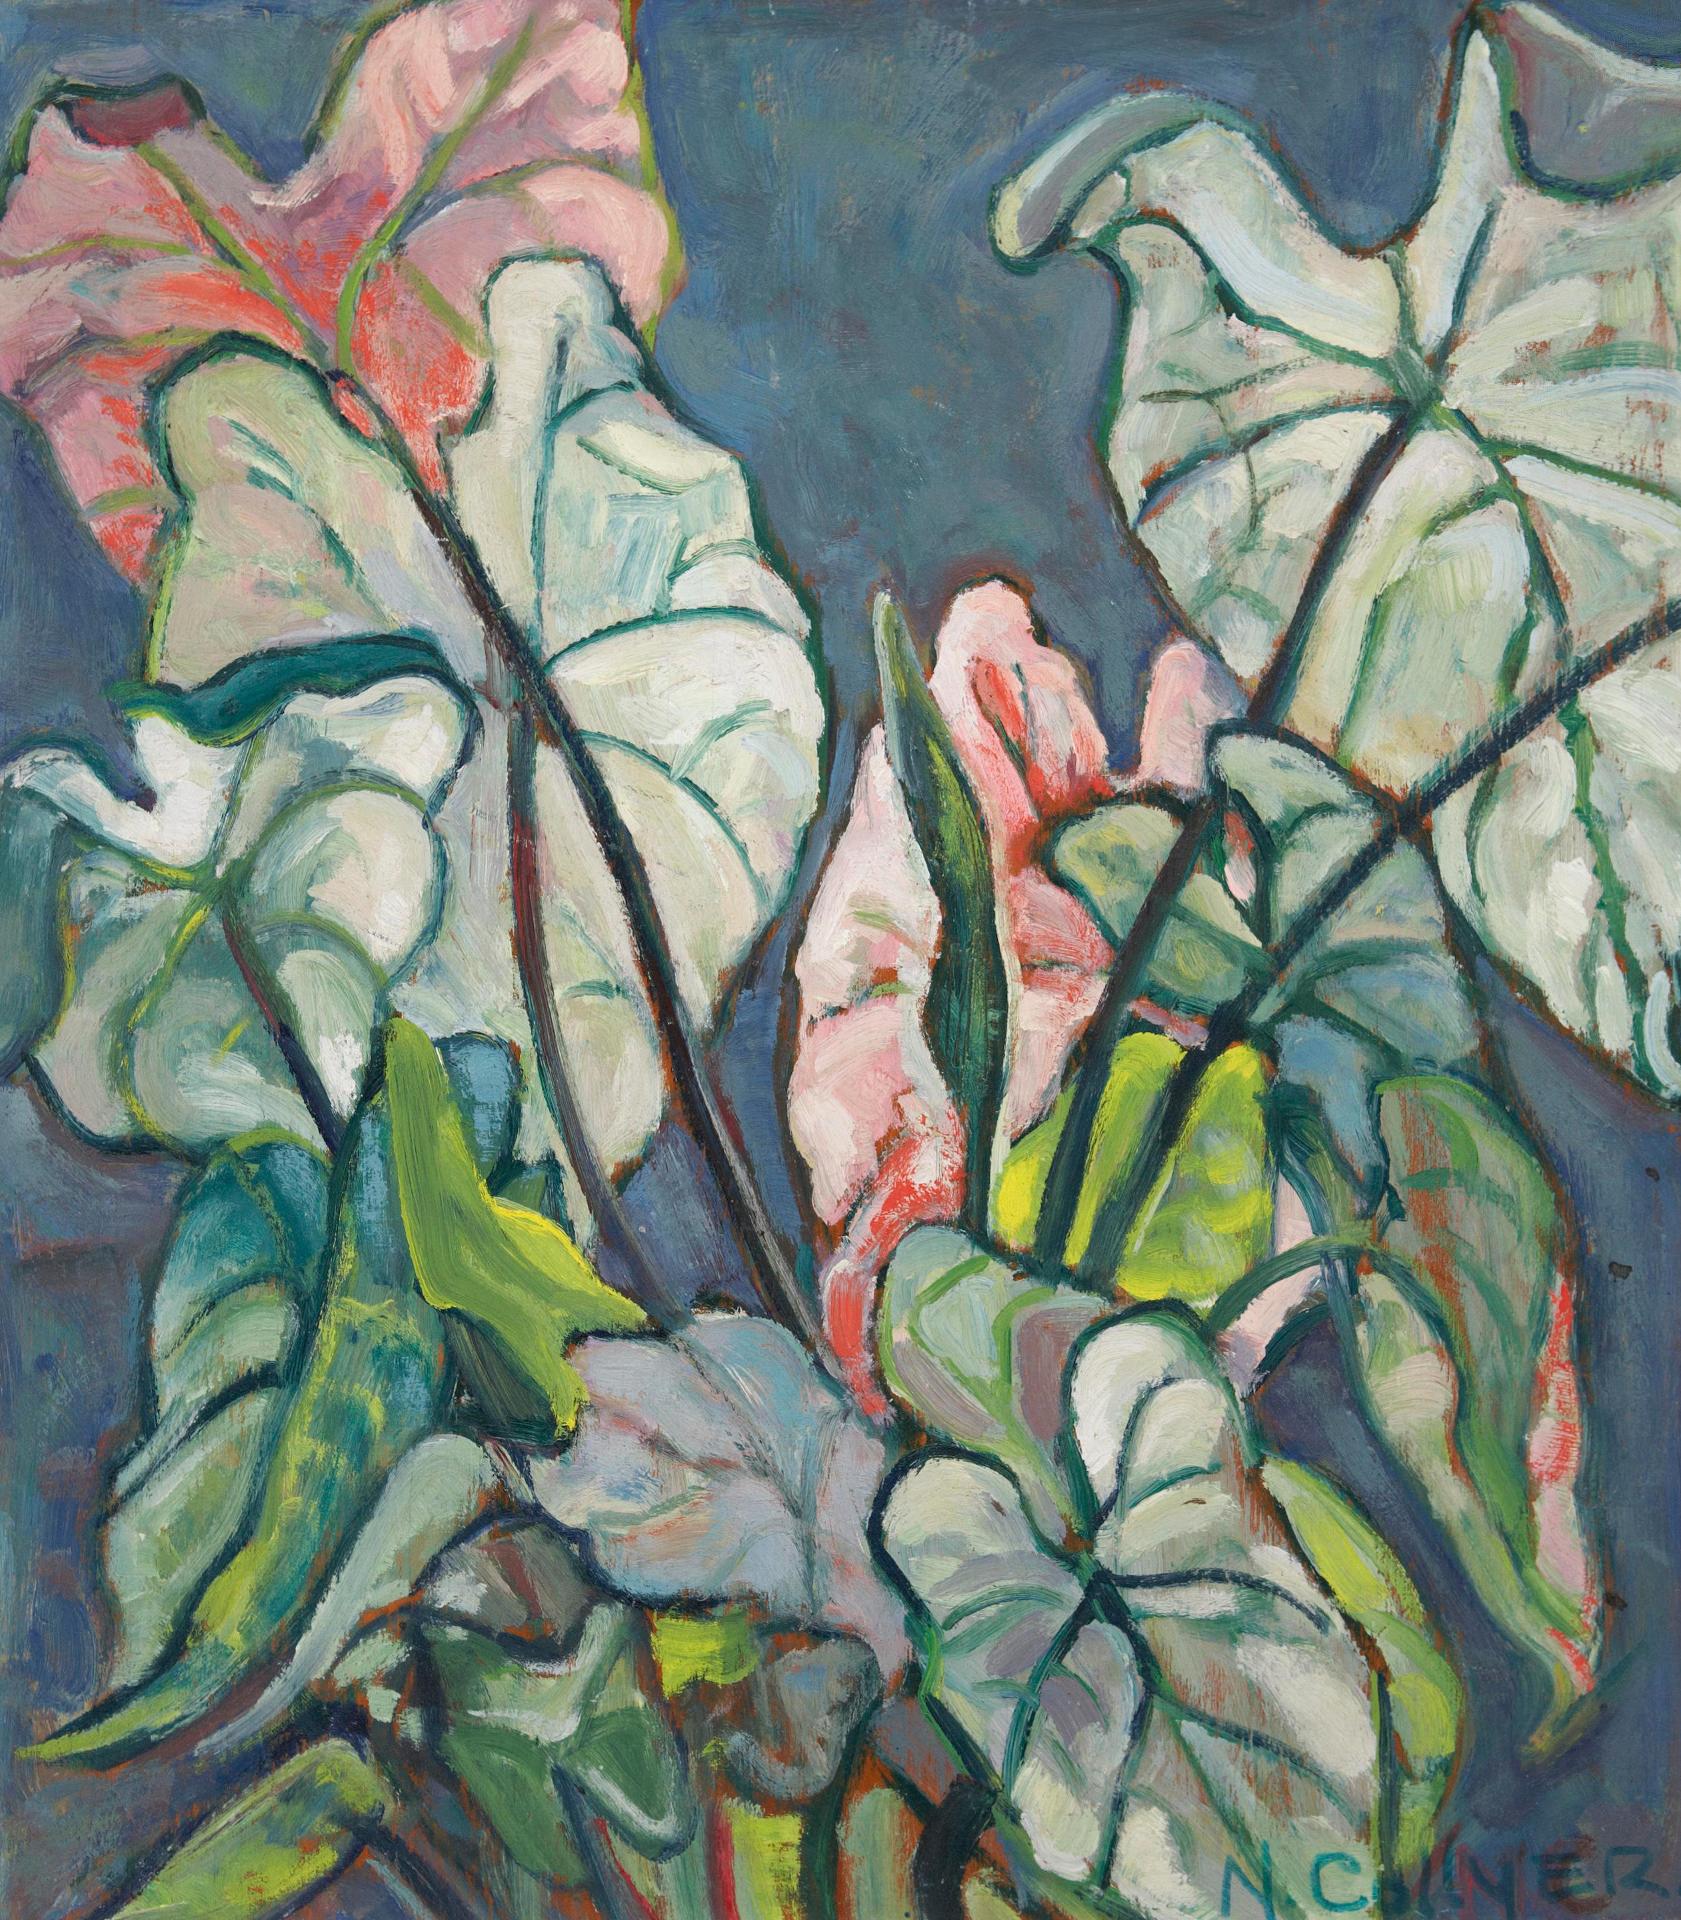 Nora Frances Elisabeth Collyer (1898-1979) - Caladium Leaves (Study of a plowed field verso)